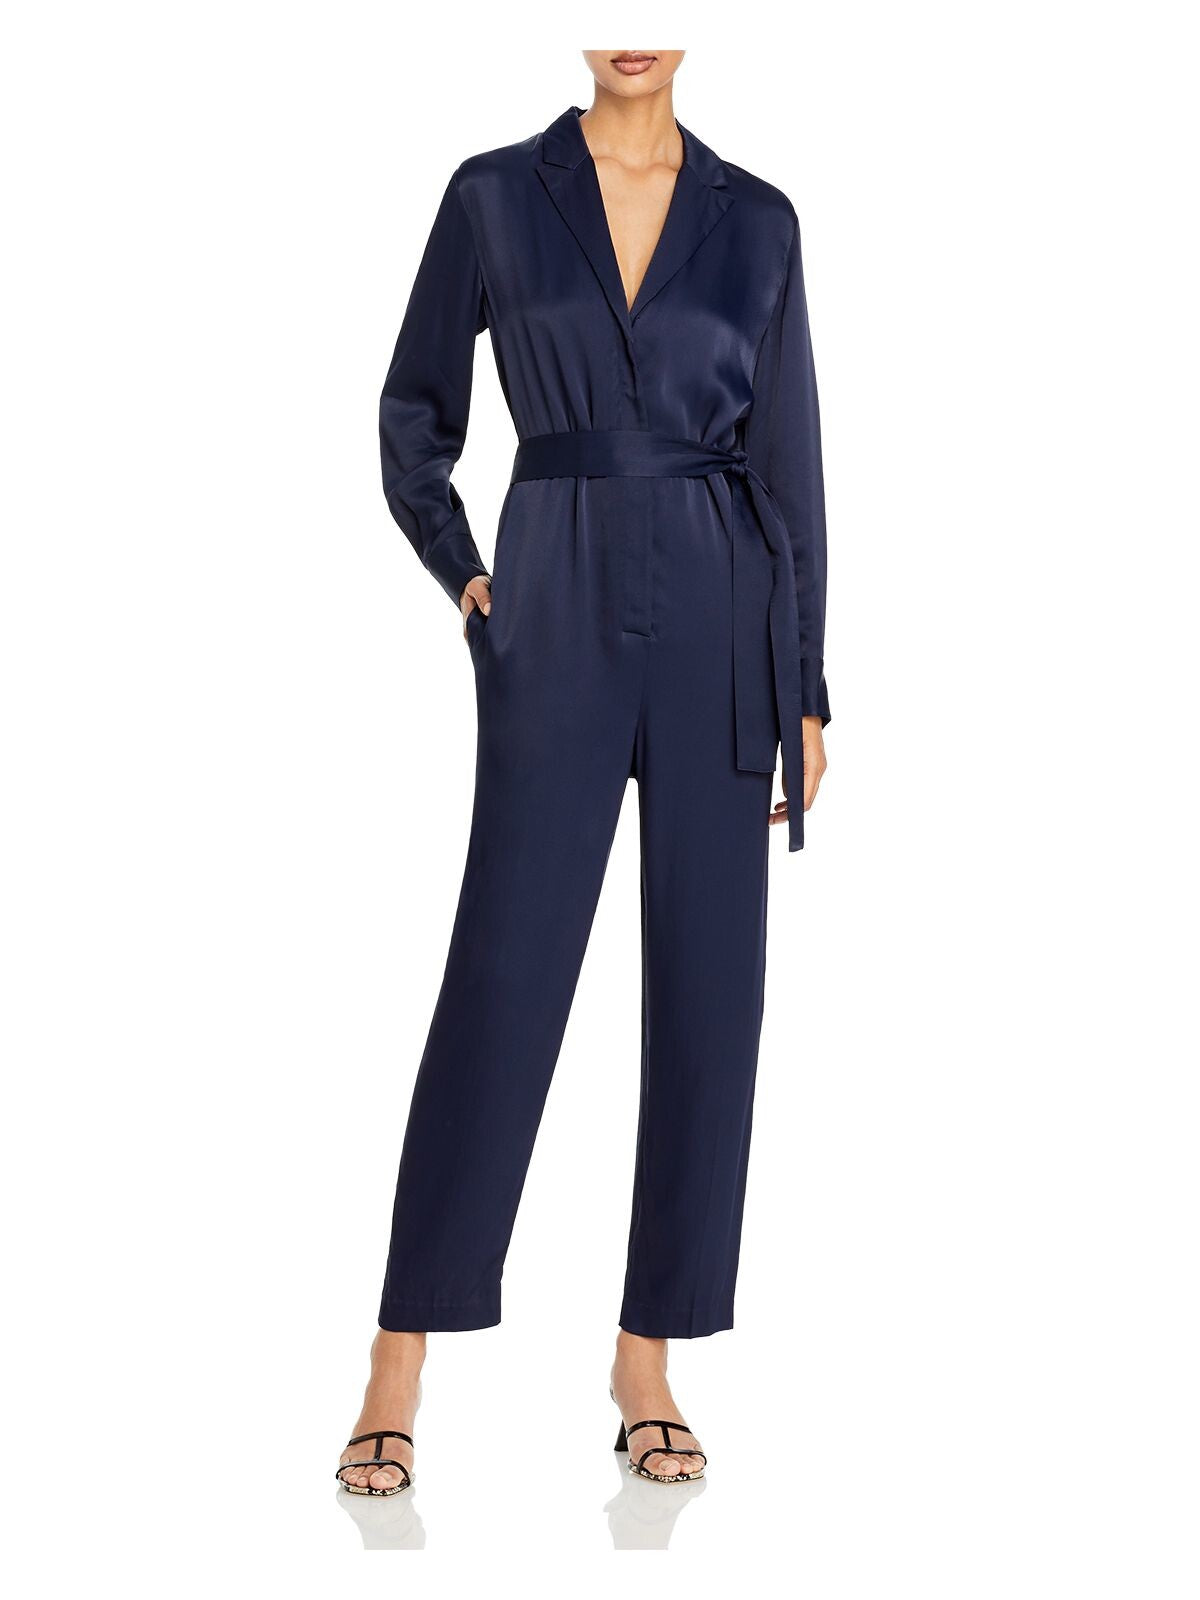 3.1 PHILLIP LIM Womens Navy Belted Satin Tuxedo Collared Evening Cropped Jumpsuit 8